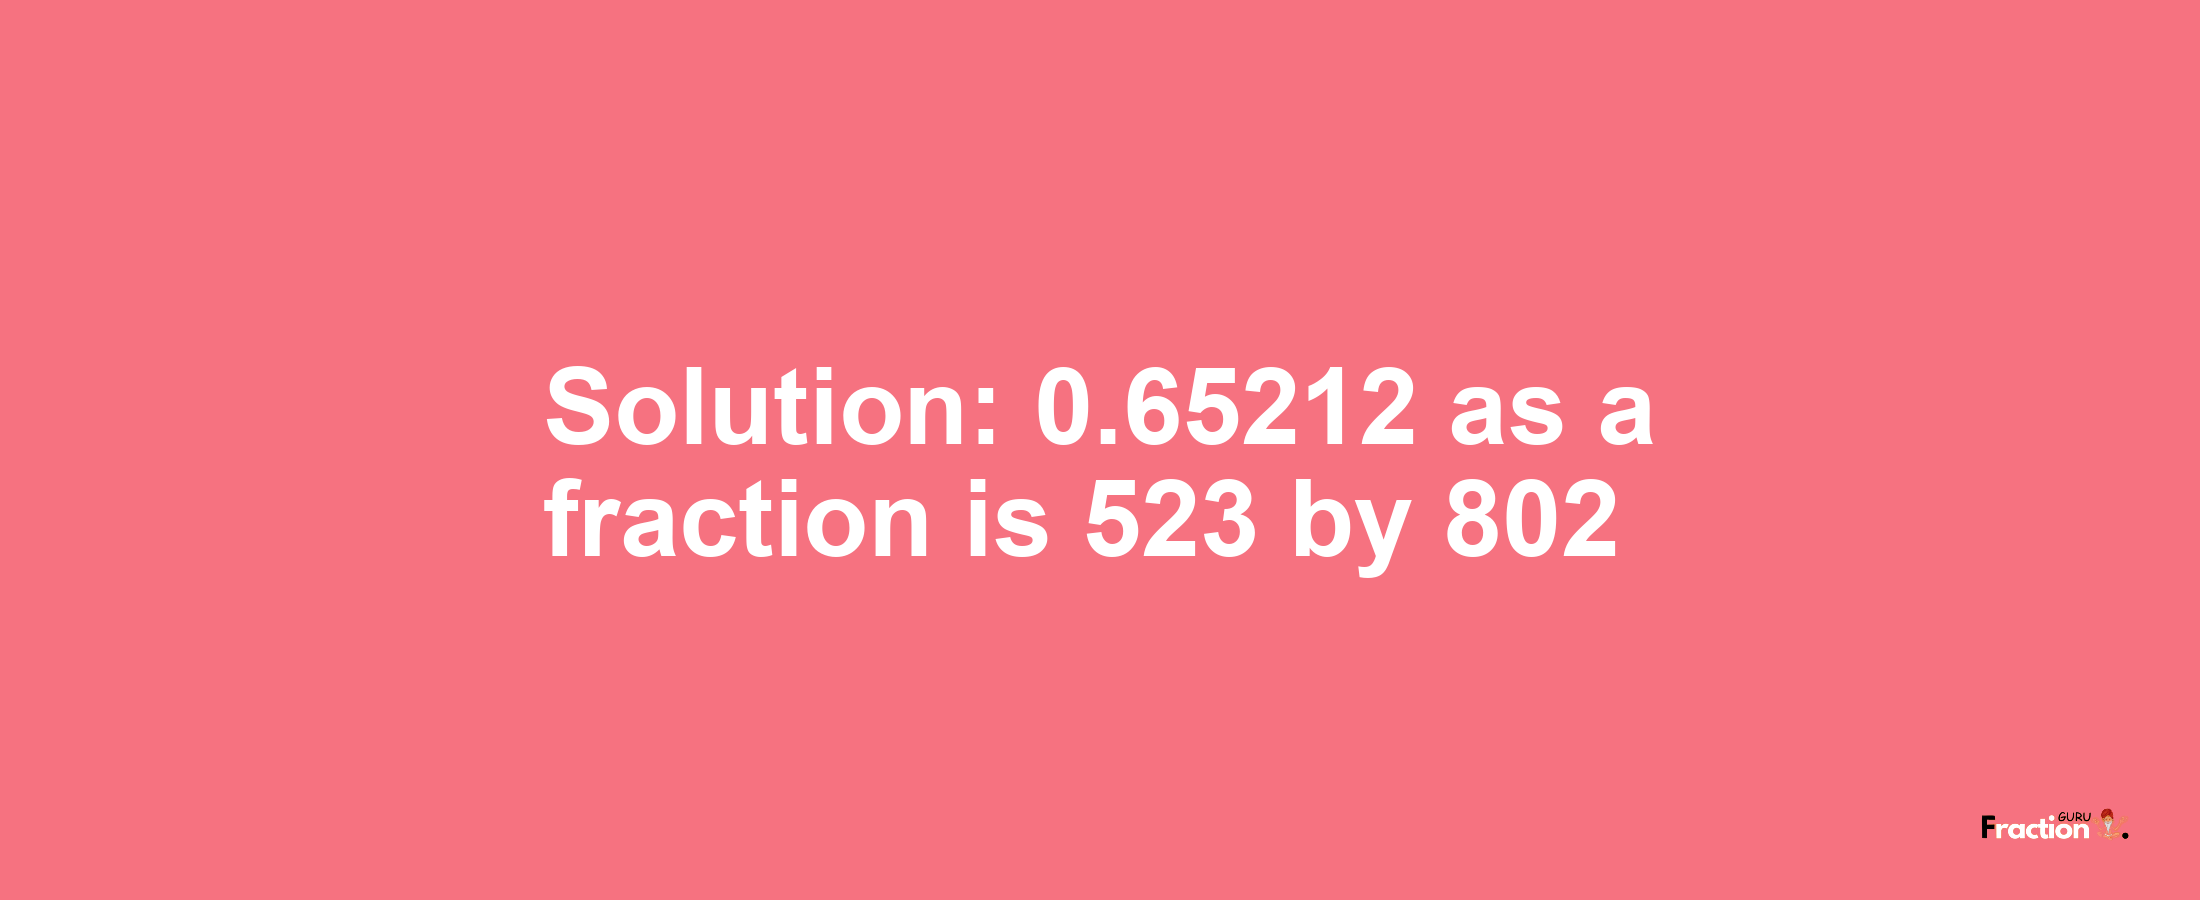 Solution:0.65212 as a fraction is 523/802